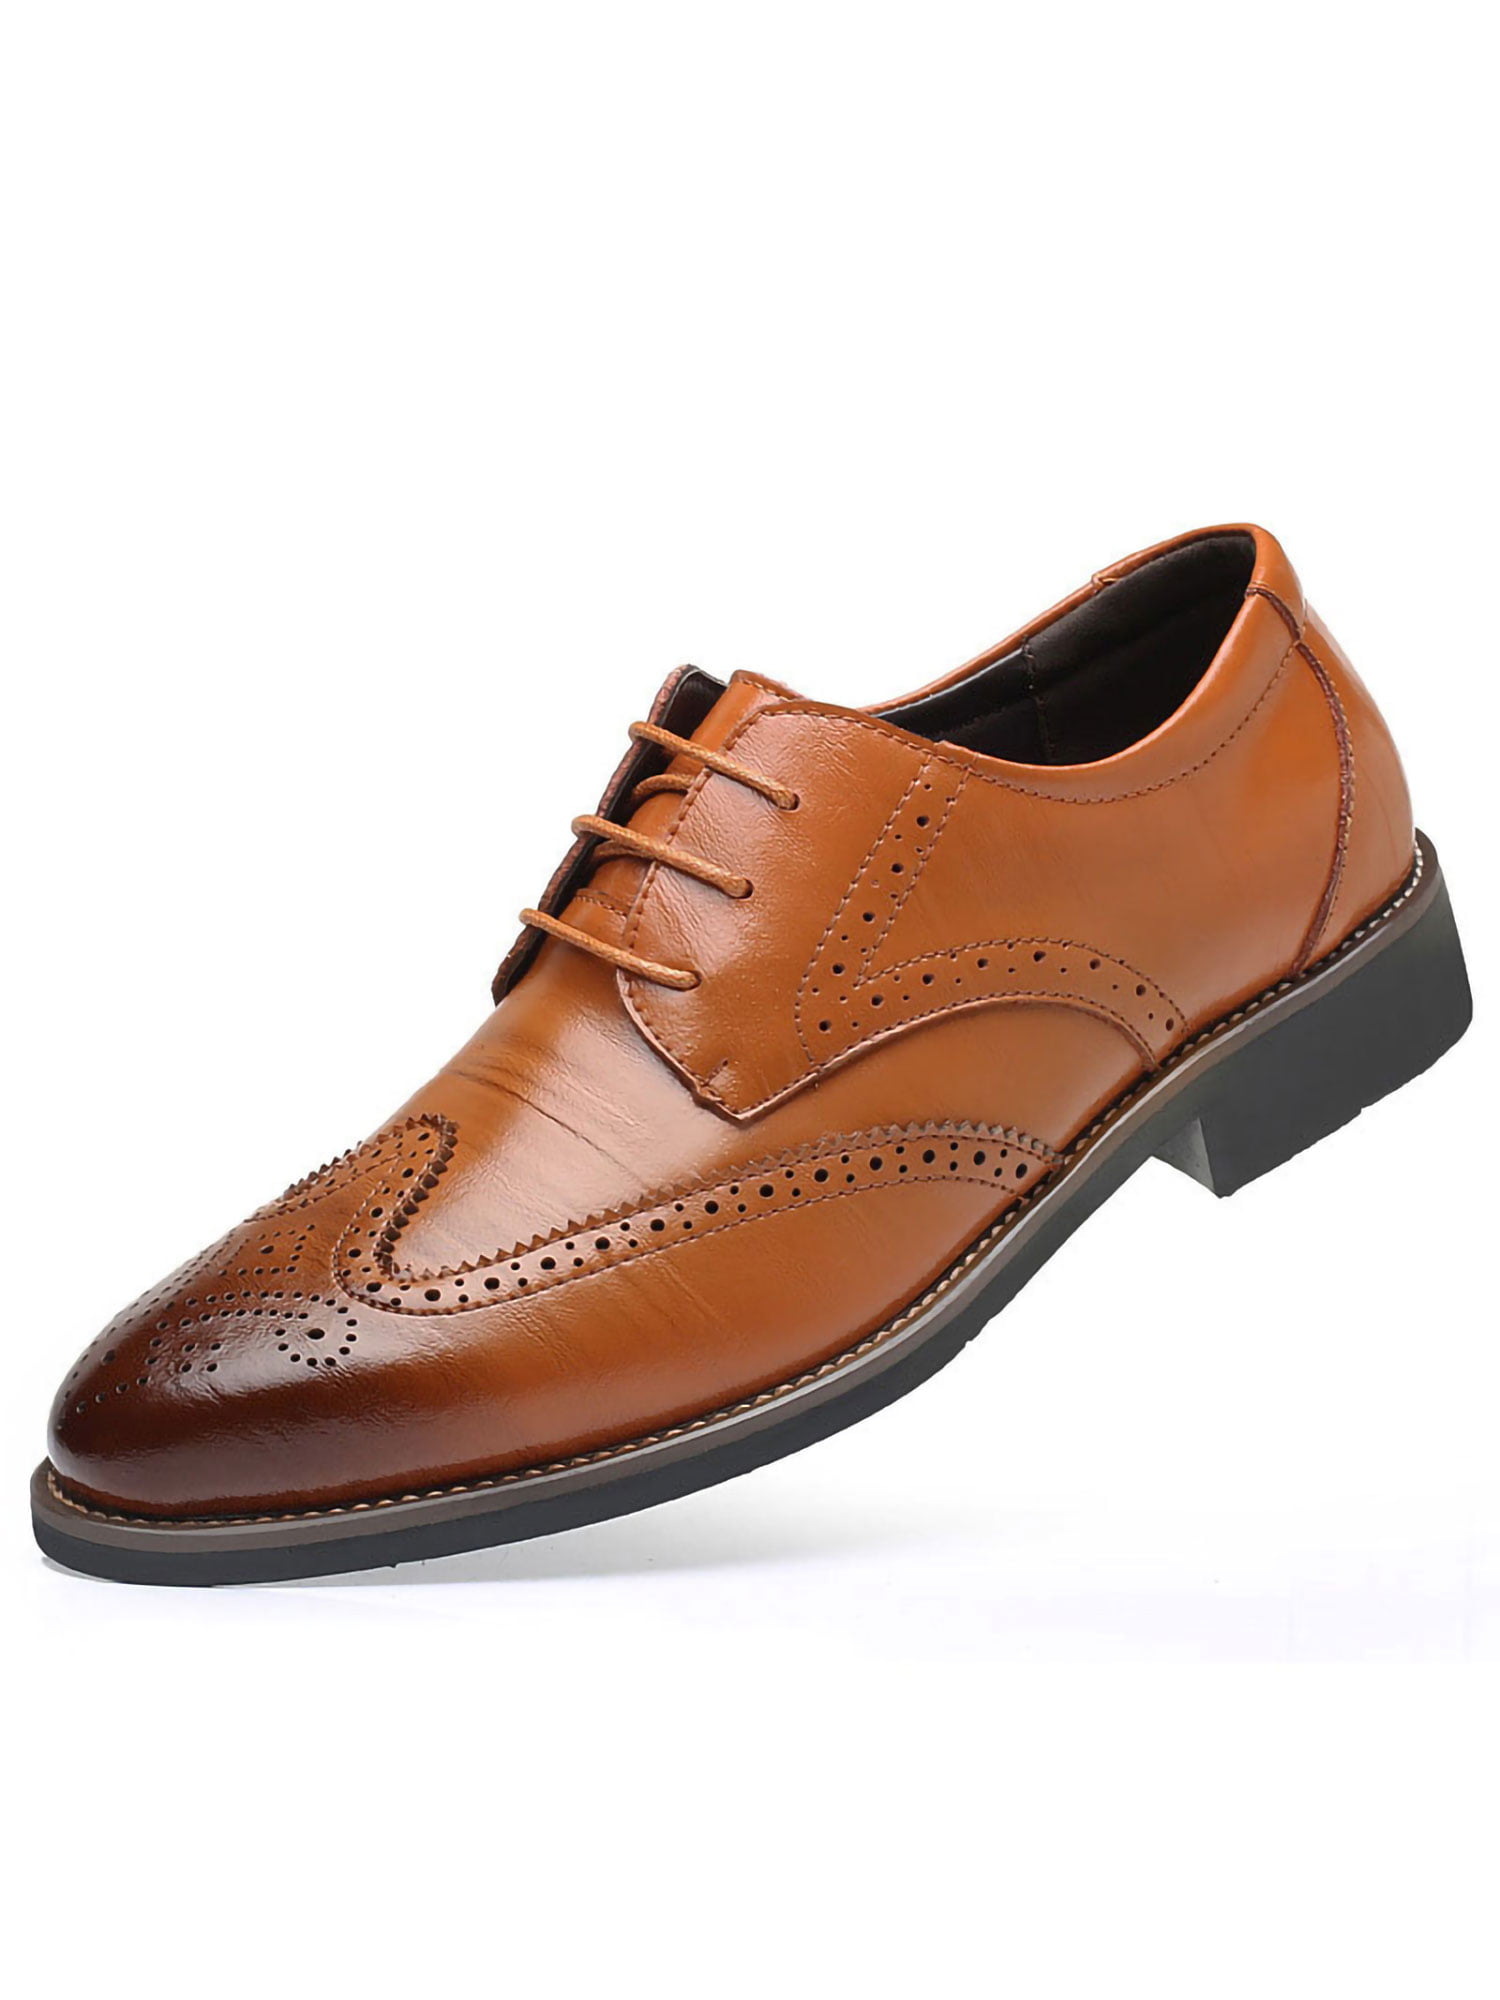 Details about   Men Low Top Brogue Faux Leather Business Work Office Oxfords Carved Formal Shoes 